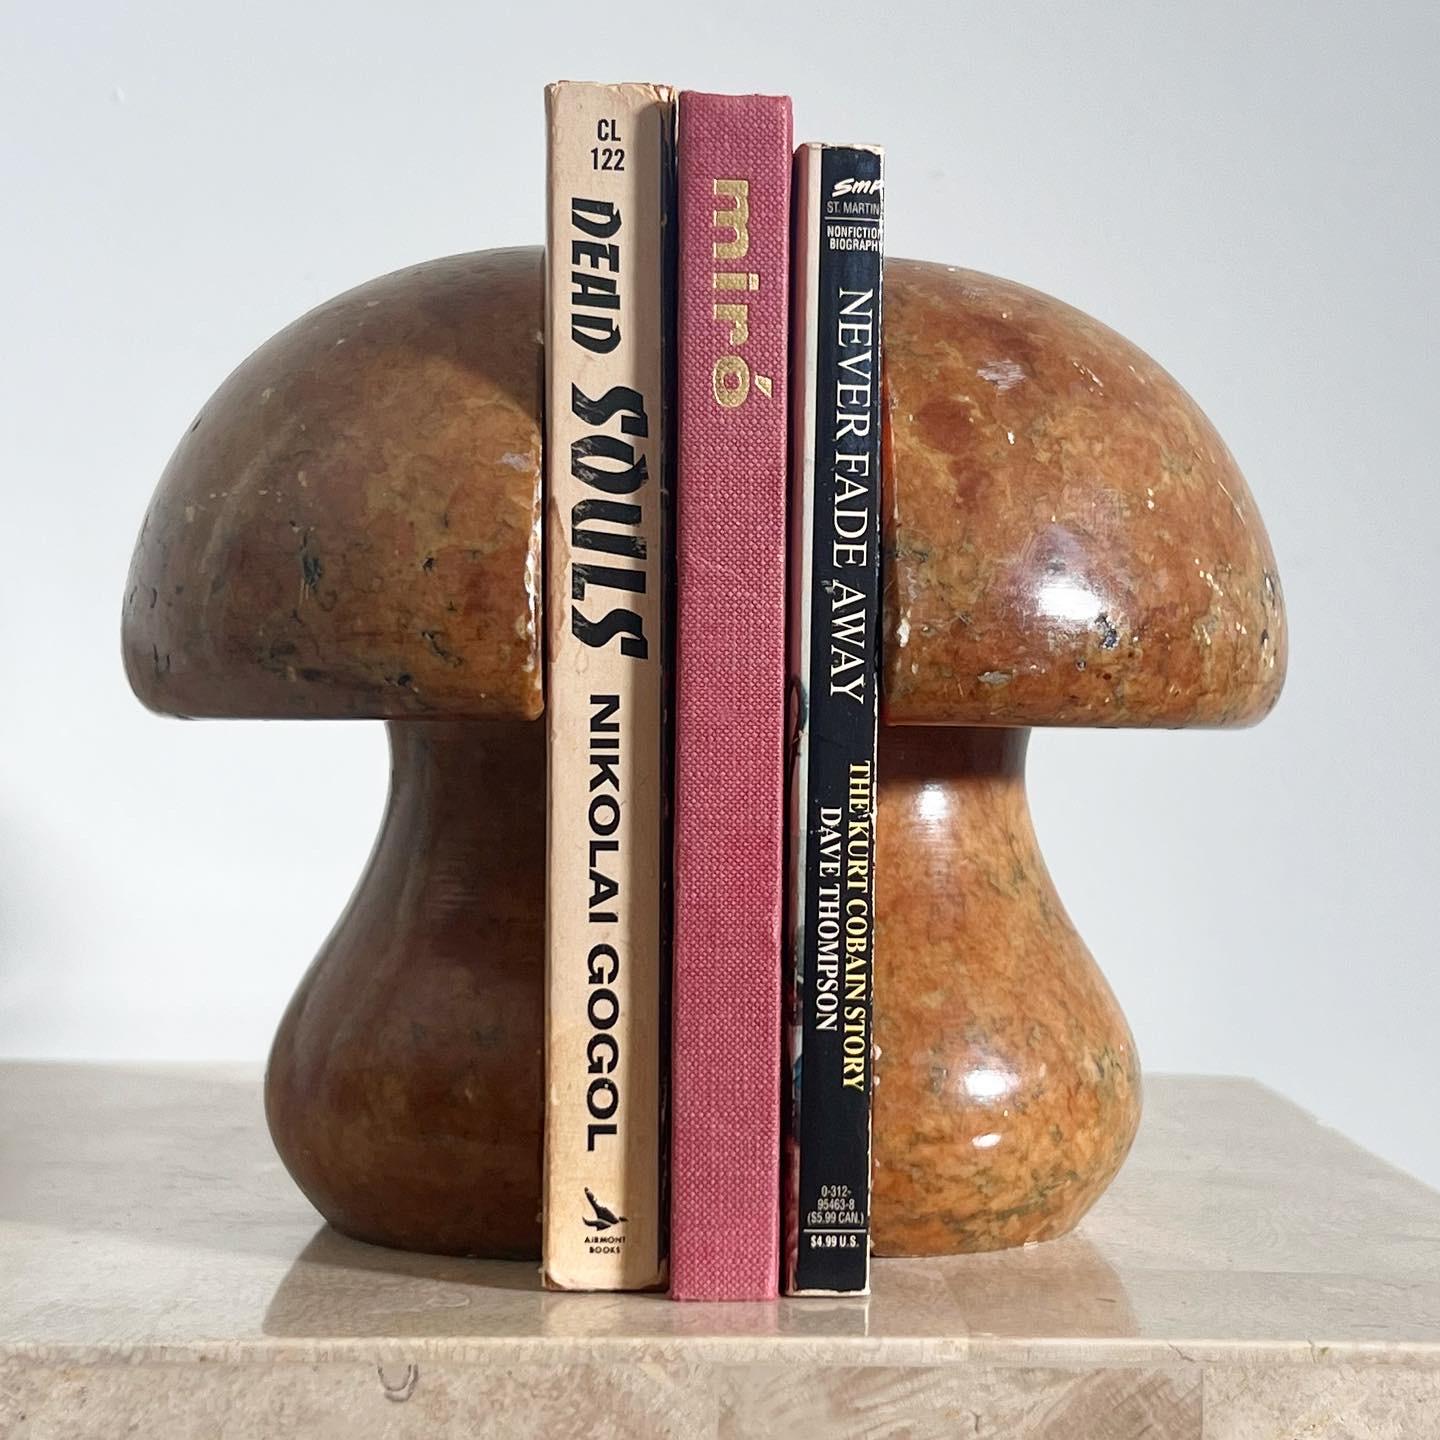 A pair of vintage Italian marble mushroom bookends, hand-carved in Italy, 1960s. Tones of ochre, rust, and olive. Minor signs of wear n tear. Pick up in central West Los Angeles or we ship worldwide. 
As a unit: 5.5” W x 6” D x 6.5” H